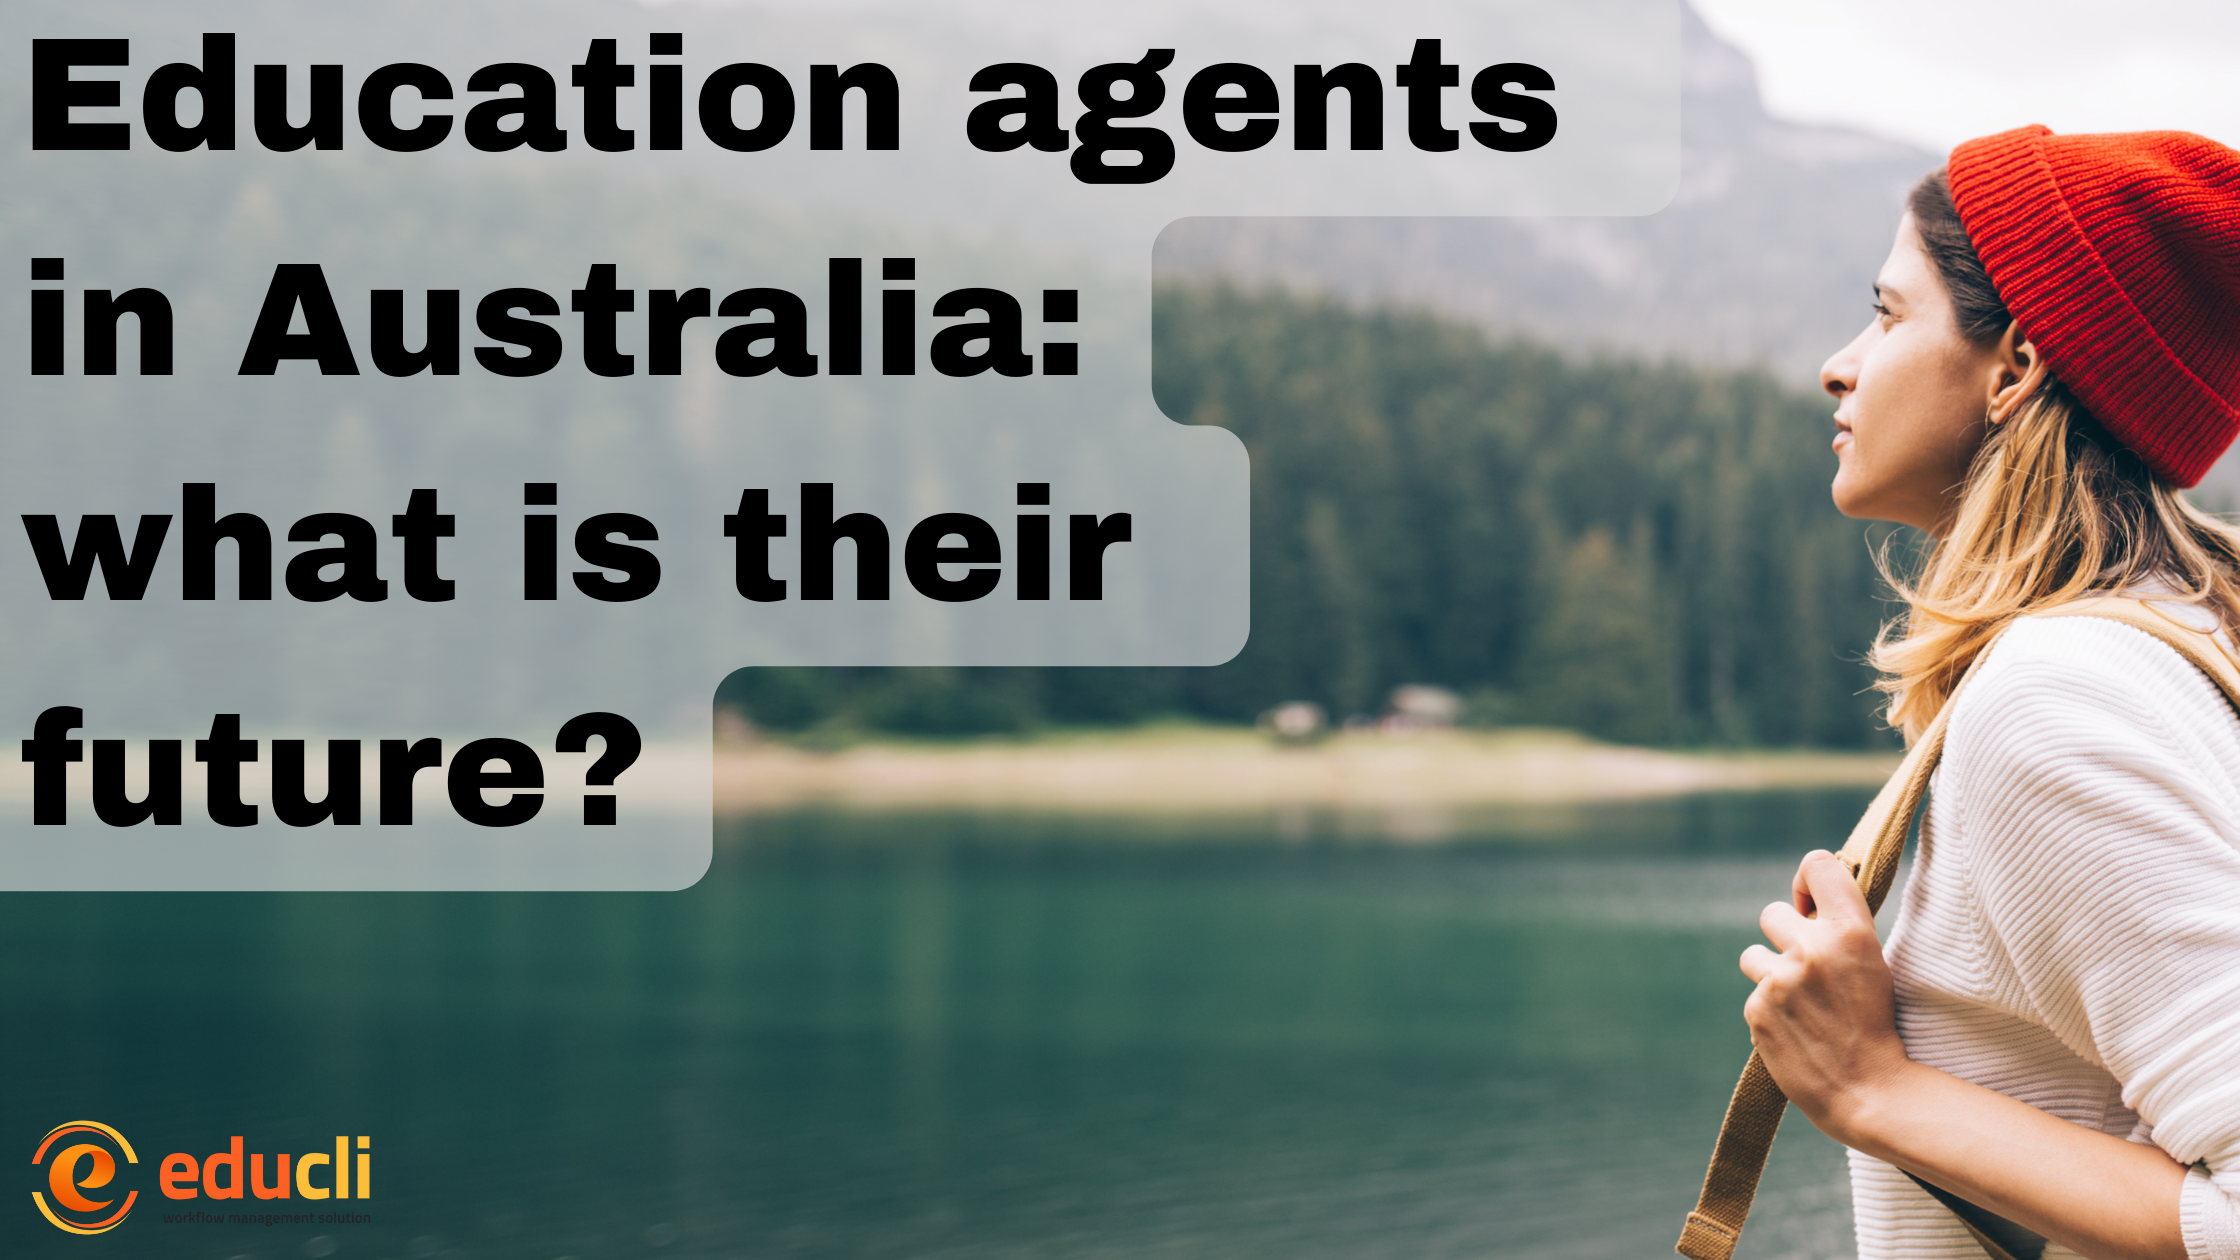 EDUCATION AGENTS IN AUSTRALIA: WHAT IS THEIR FUTURE?